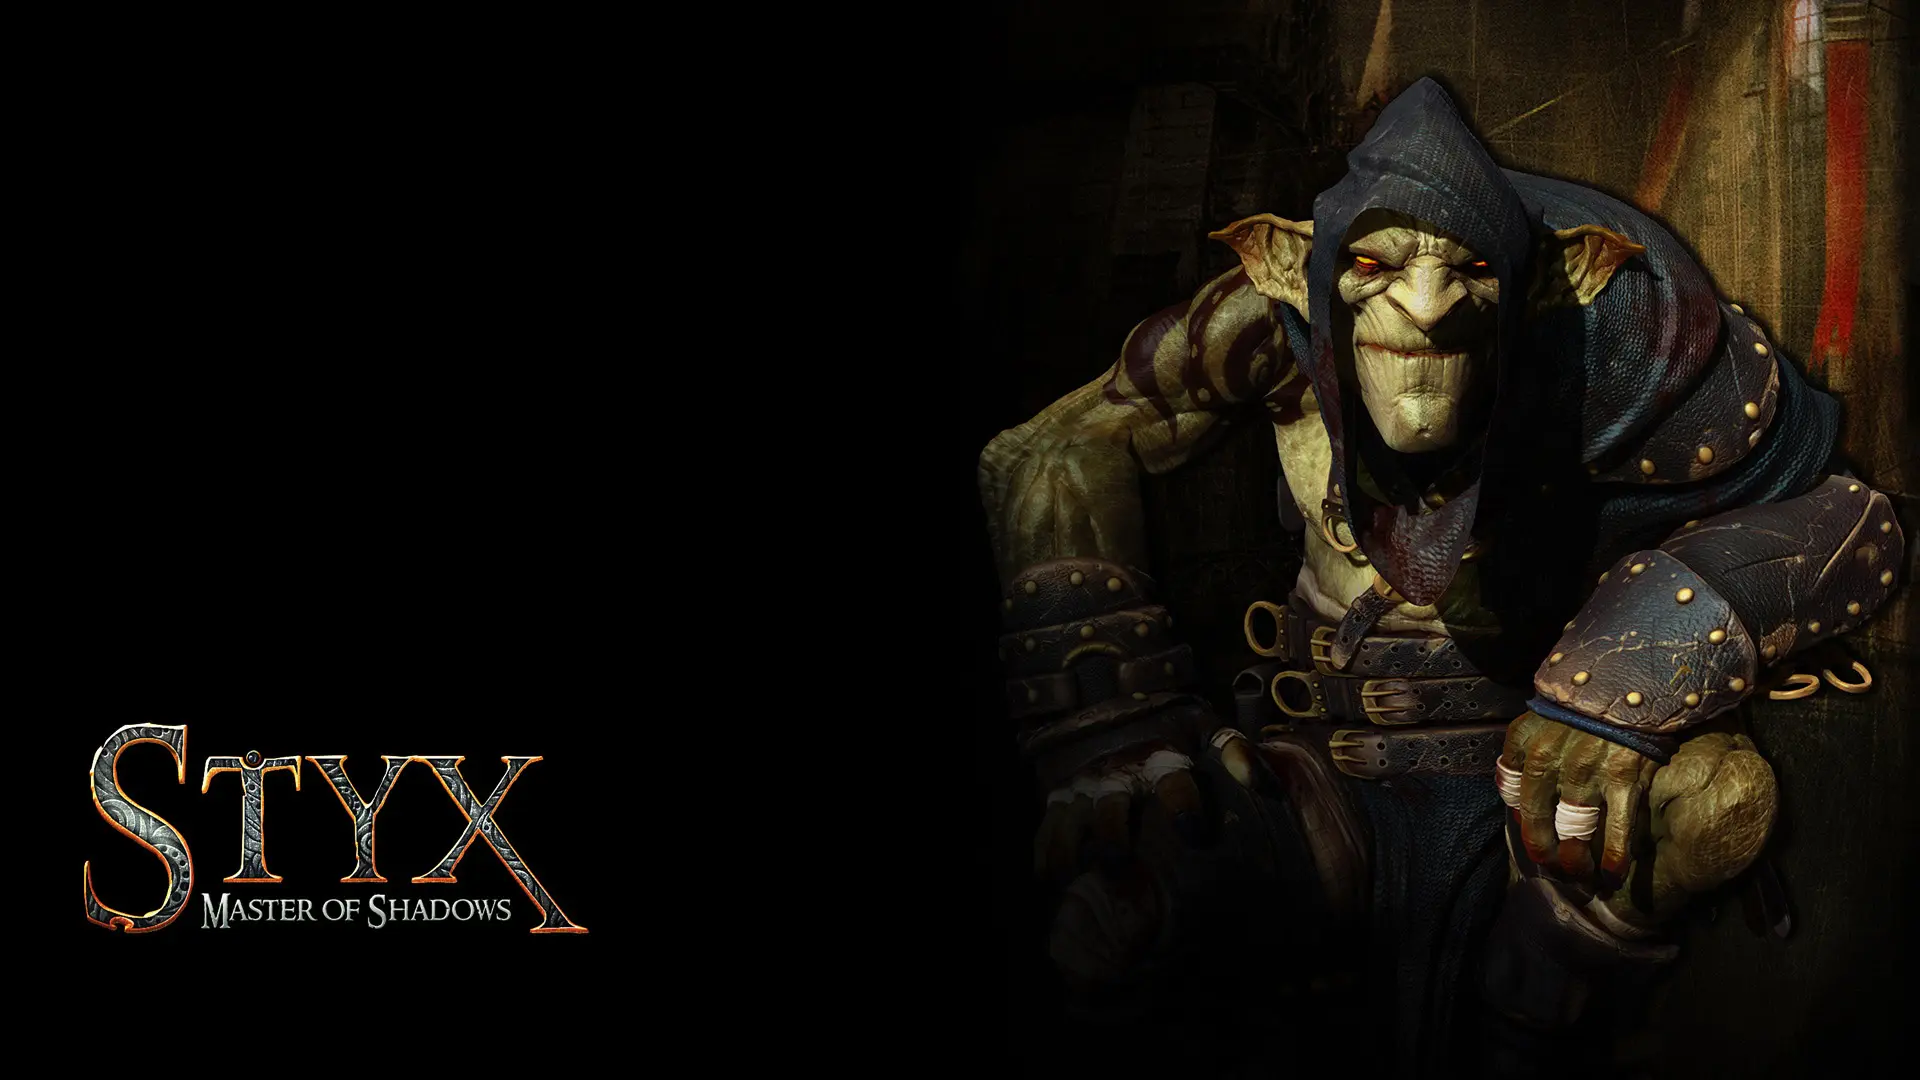 Game Styx Master of Shadows wallpaper 2 | Background Image